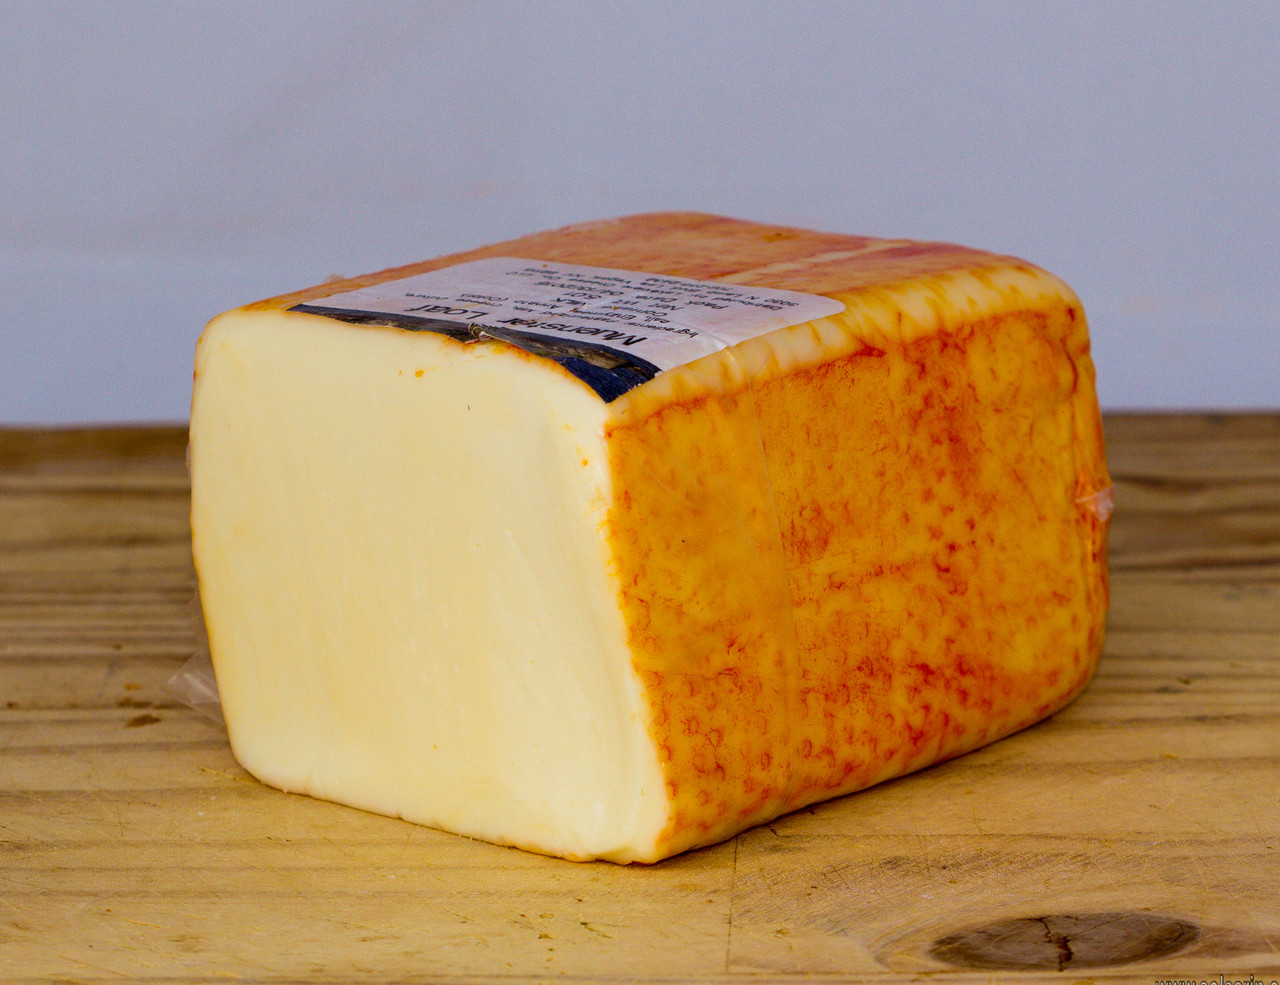 cheese similar to muenster